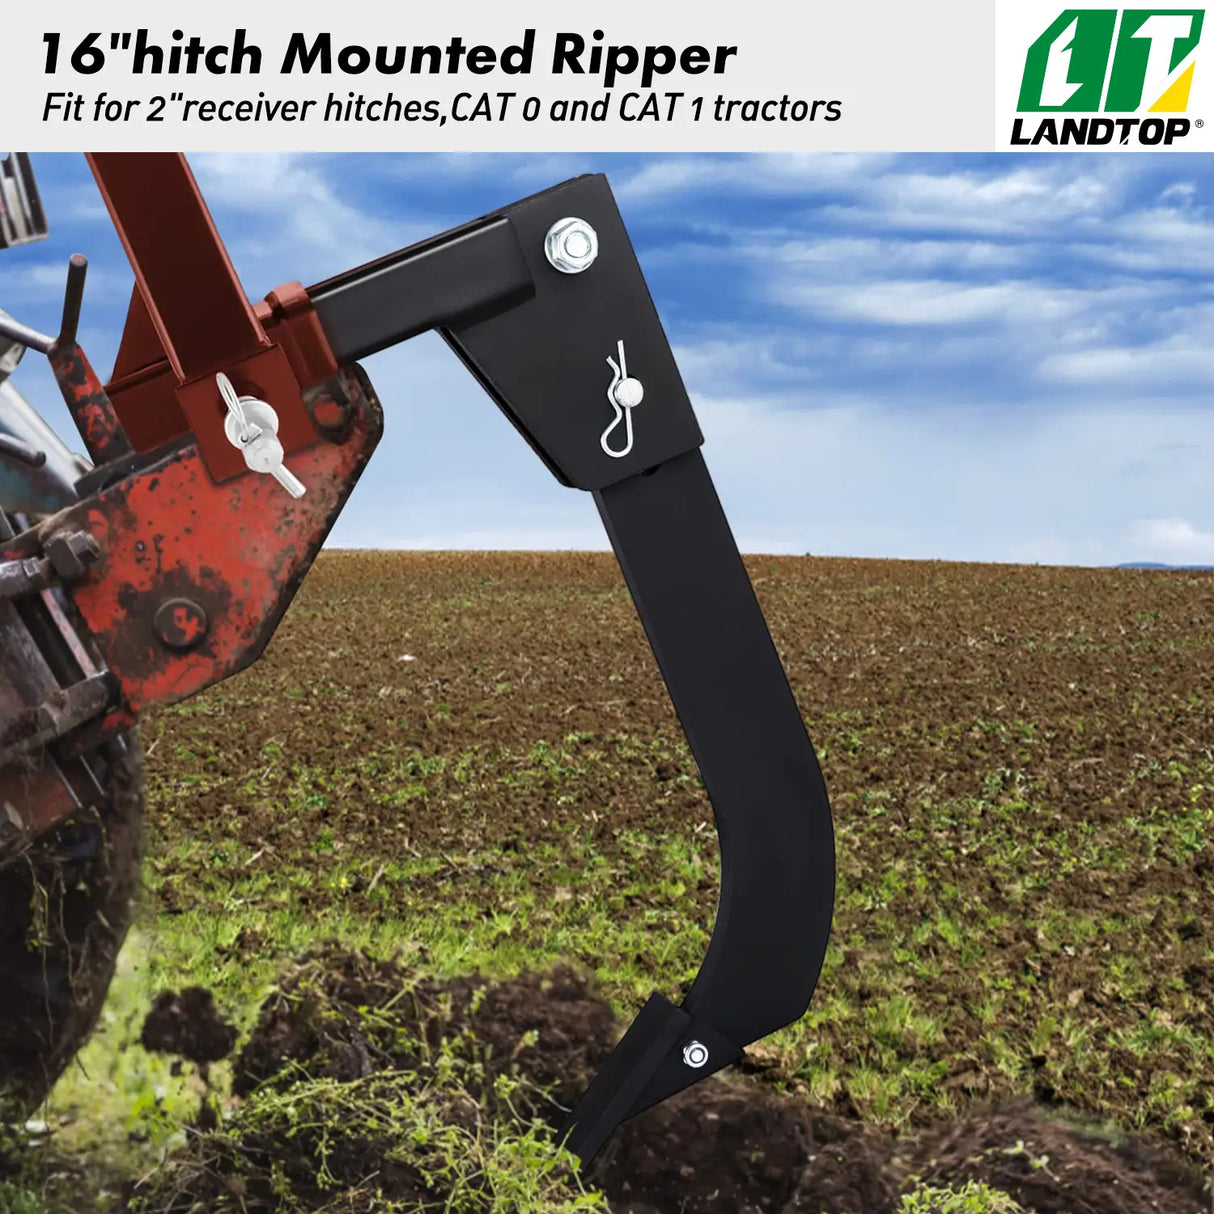 Hitch Mounted Ripper, 16" Shank Length Box Scraper Shank, 4 Hole Site Box Blade for Tractor, 2 Locating Pins Ripper Shank, 2 Plough Tips Box Blade Shank Teeth